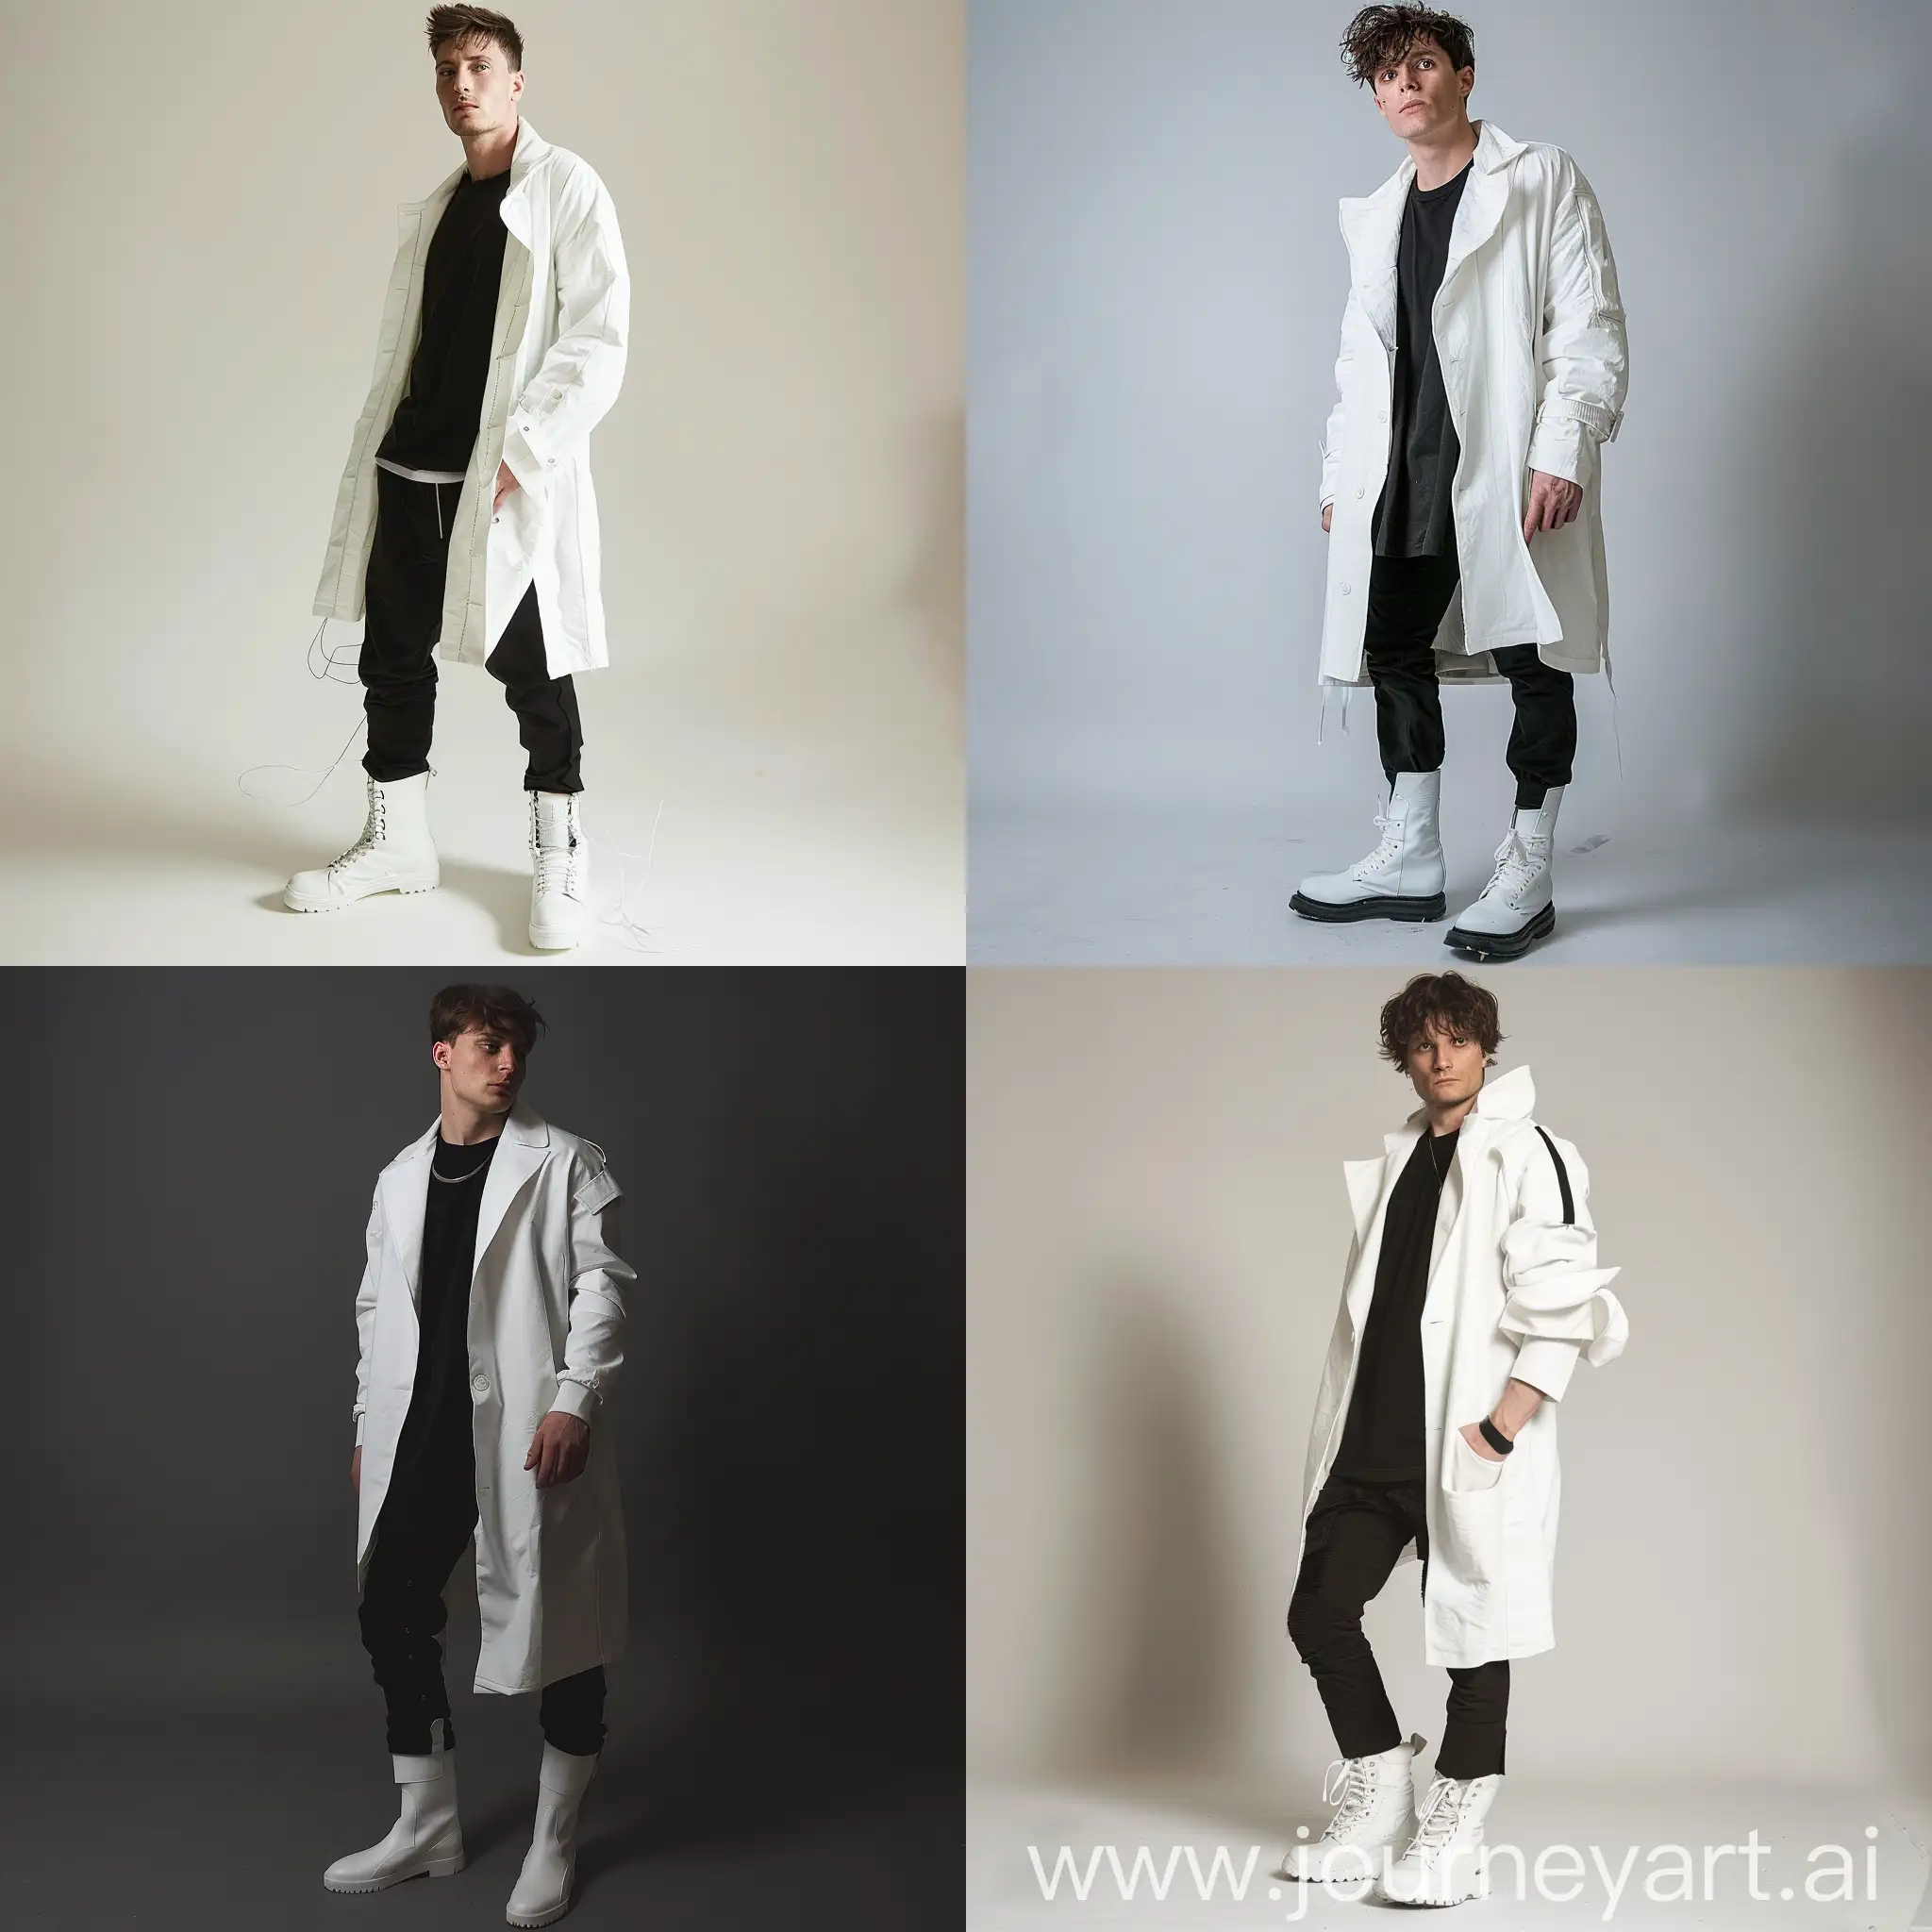 Stylish-Young-Man-in-Fashionable-White-Coat-and-Black-Ensemble